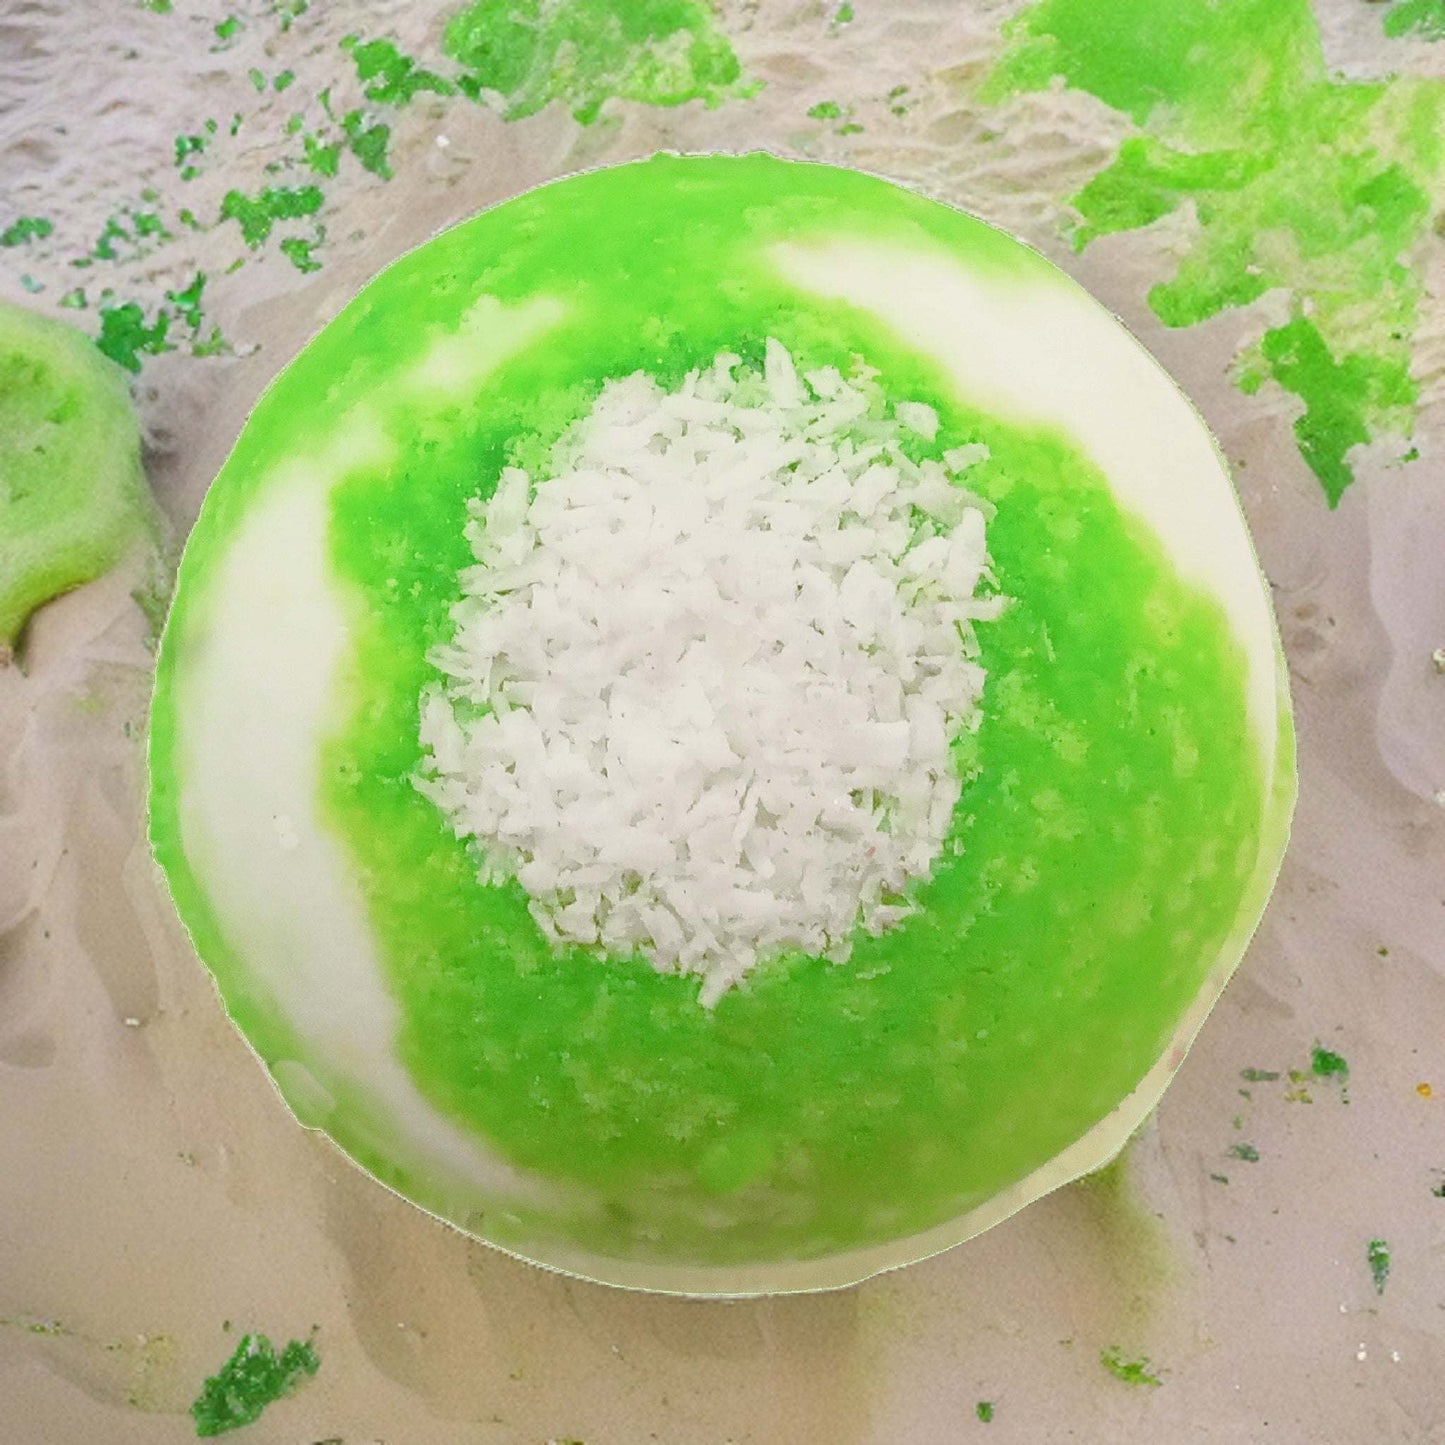 Indulge in a luxurious bath with our Coconut Lime Fizzy Bath Bomb! Elevate your bath routine today.